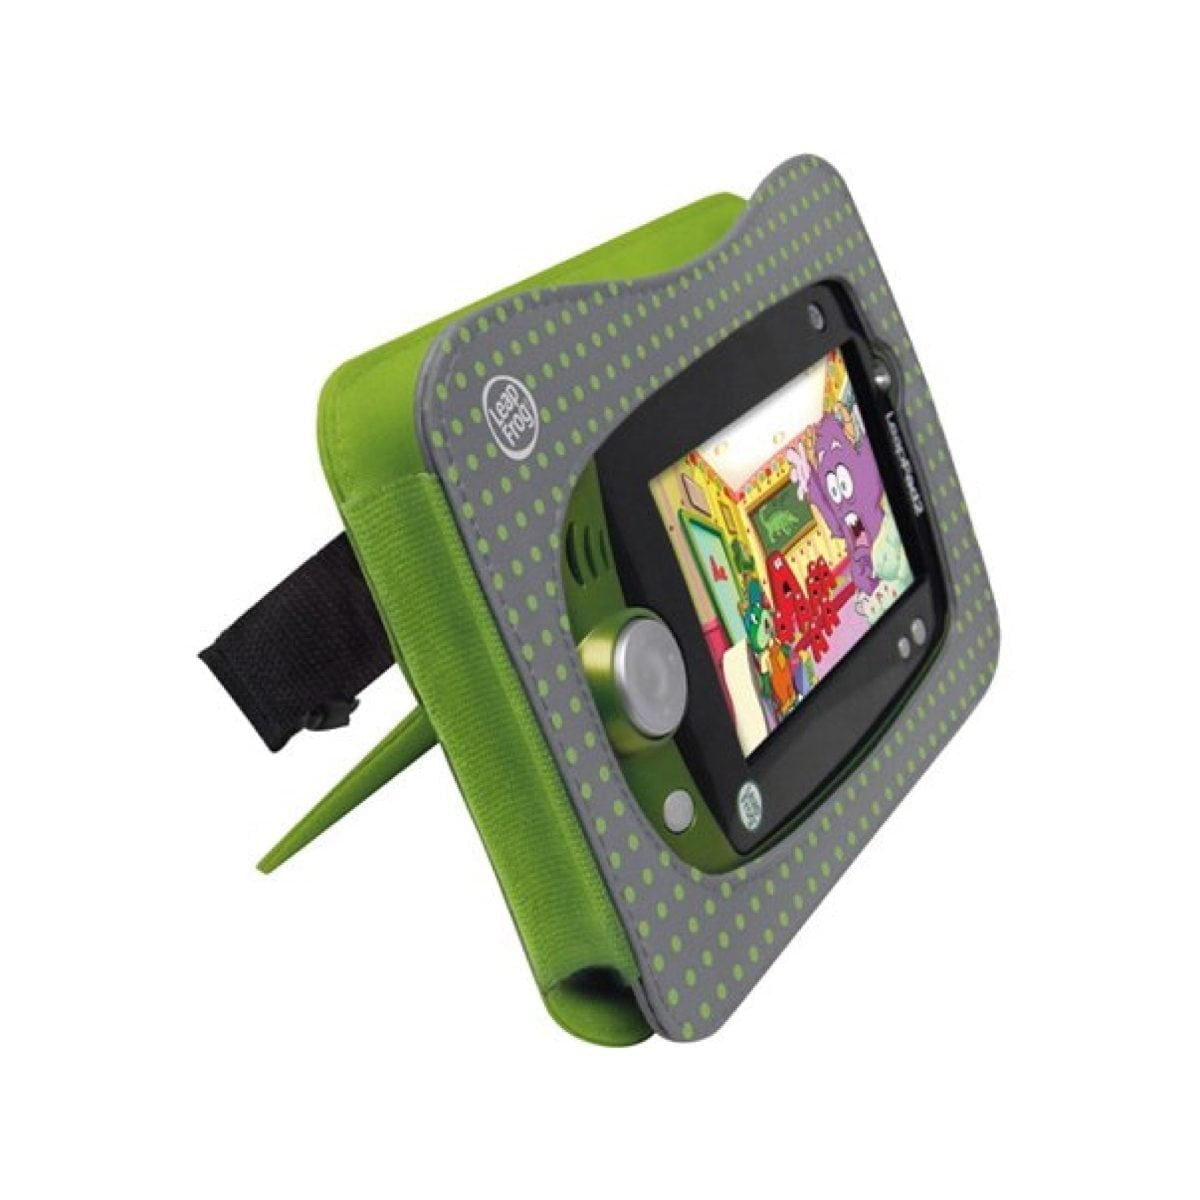 Leopard 04 Scaled &Lt;Div Class=&Quot;Good-Desc&Quot;&Gt; &Lt;P Class=&Quot;Description&Quot;&Gt;Your Little One Can Learn On The Go With This Video Display Case From Leapfrog. It Works With Leappad And Leappad2 Learning Systems. Just Pop The Learning Tablet Into The Soft Case And Attach It To The Headrest In Your Vehicle For Fun On The Road. Slide An Extra Cartridge Into The Attached Pouch, And Take Your Child&Quot;S Favorite Videos Along For The Ride.&Lt;/P&Gt; &Lt;/Div&Gt; &Lt;Div Class=&Quot;Goods-Panel&Quot; Role=&Quot;Tabpanel&Quot;&Gt; &Nbsp; &Lt;/Div&Gt; Leapfrog Leappad Leapfrog Leappad Video Display Case